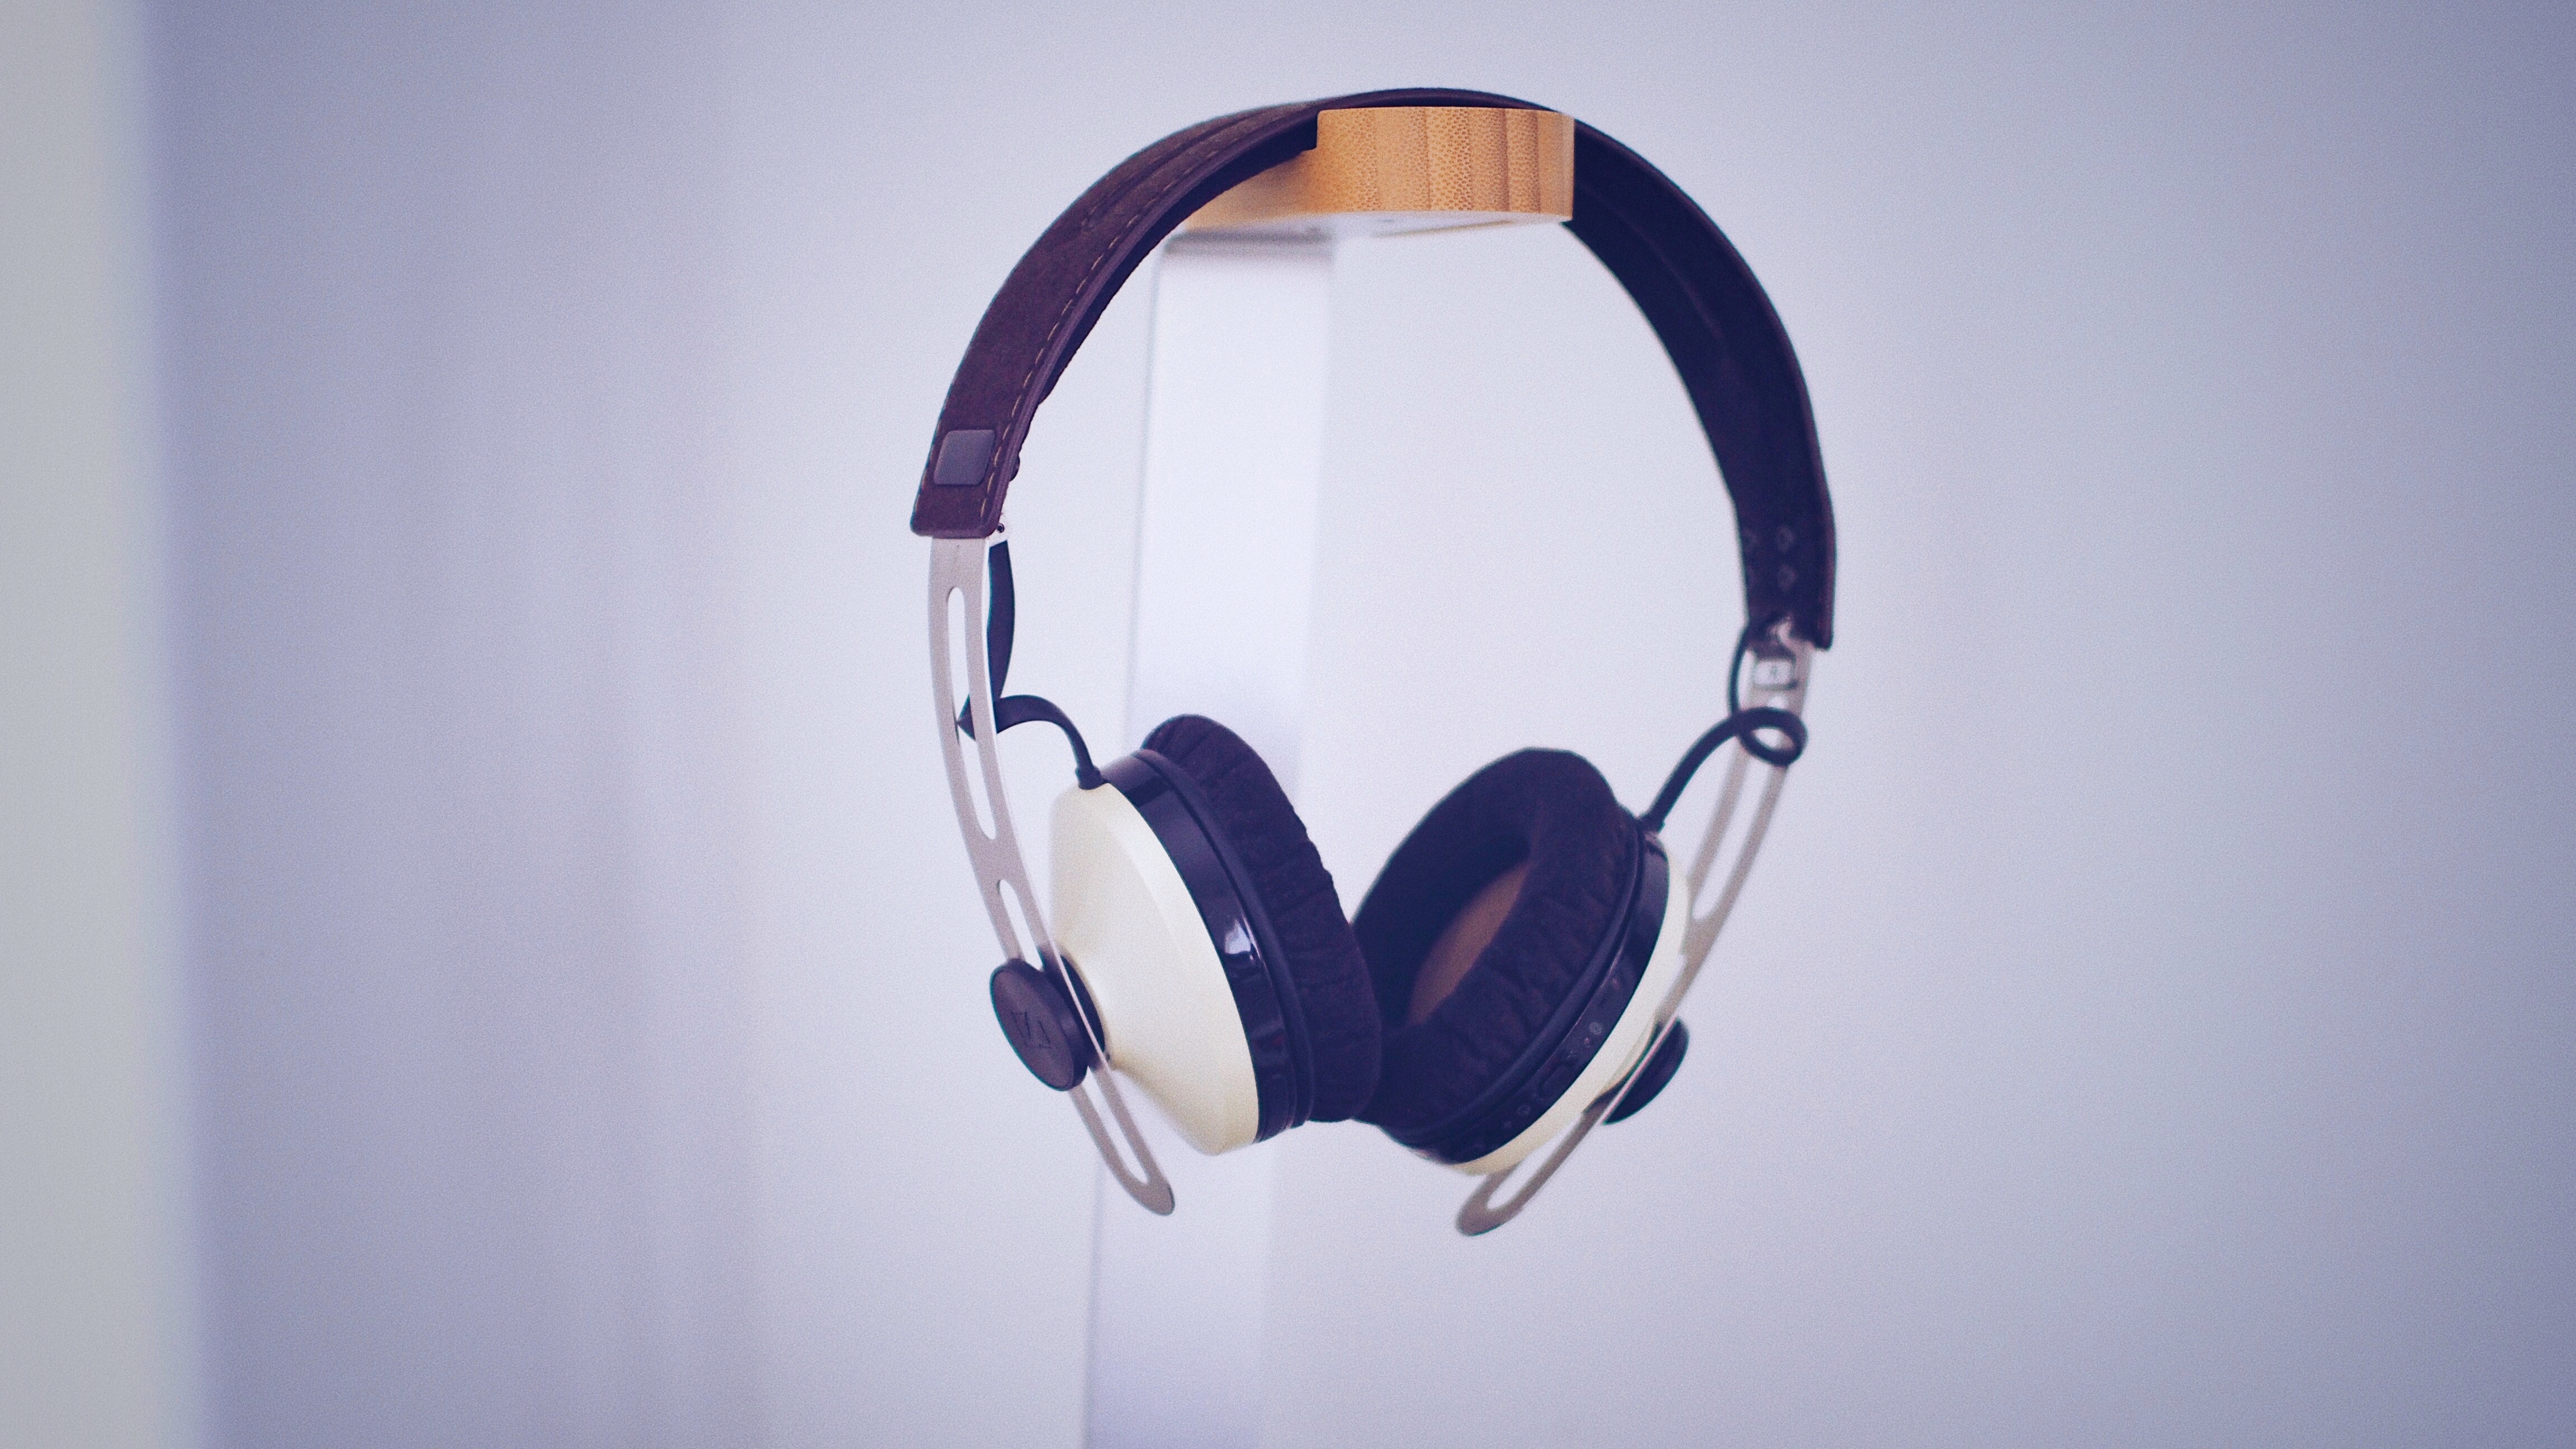 Elegant headphones in a minimalist setting, combining classic design with modern style.